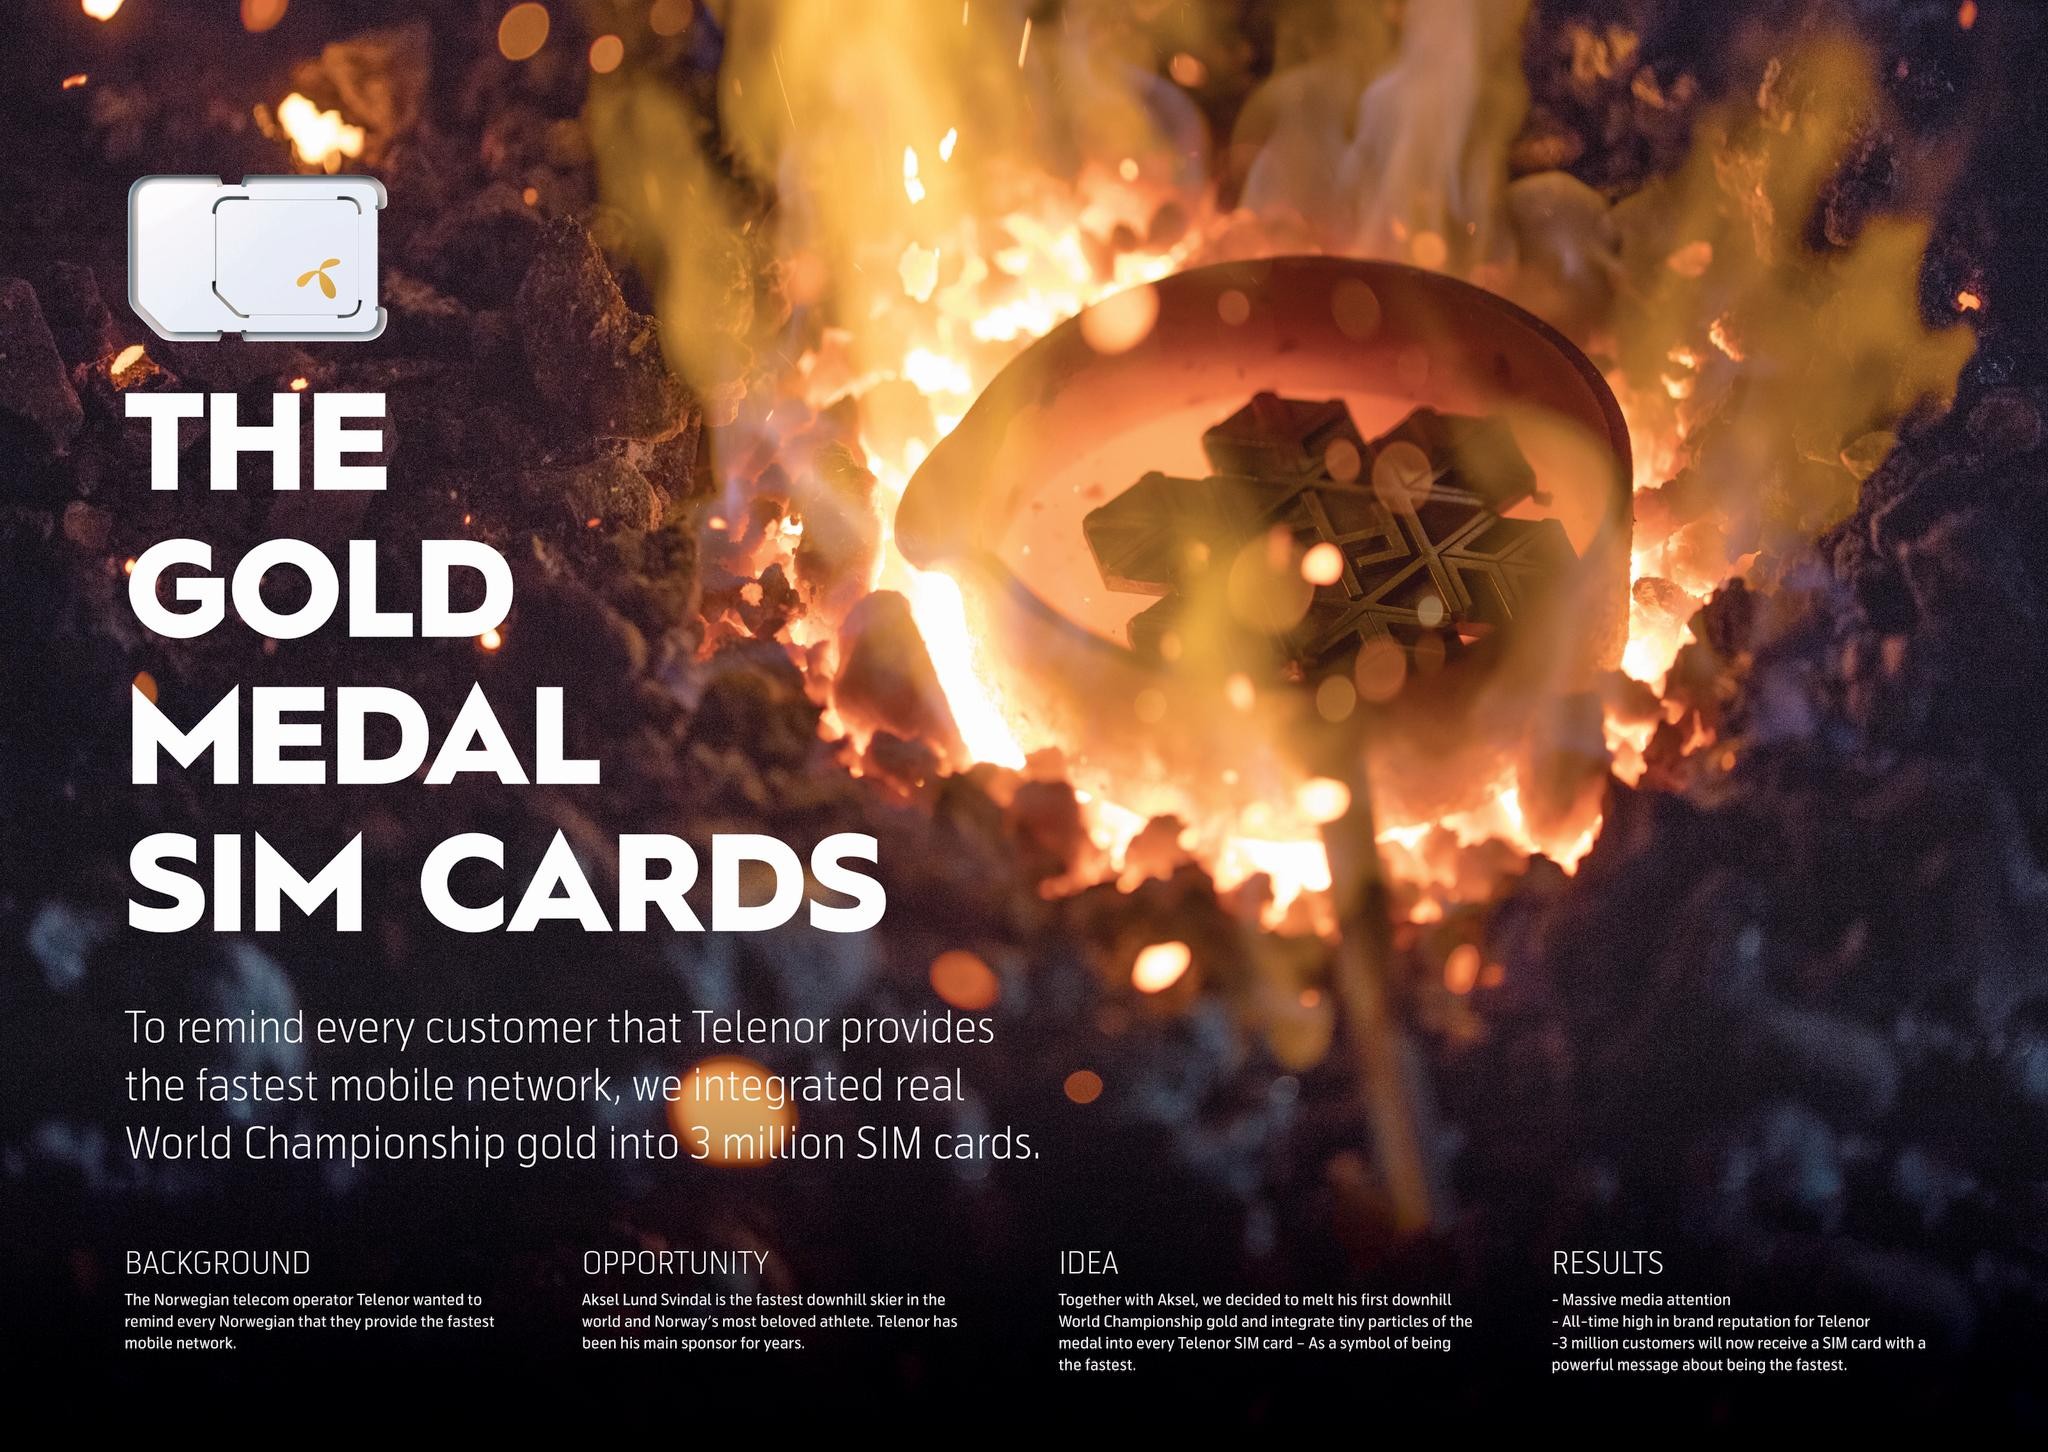 THE GOLD MEDAL SIM CARDS